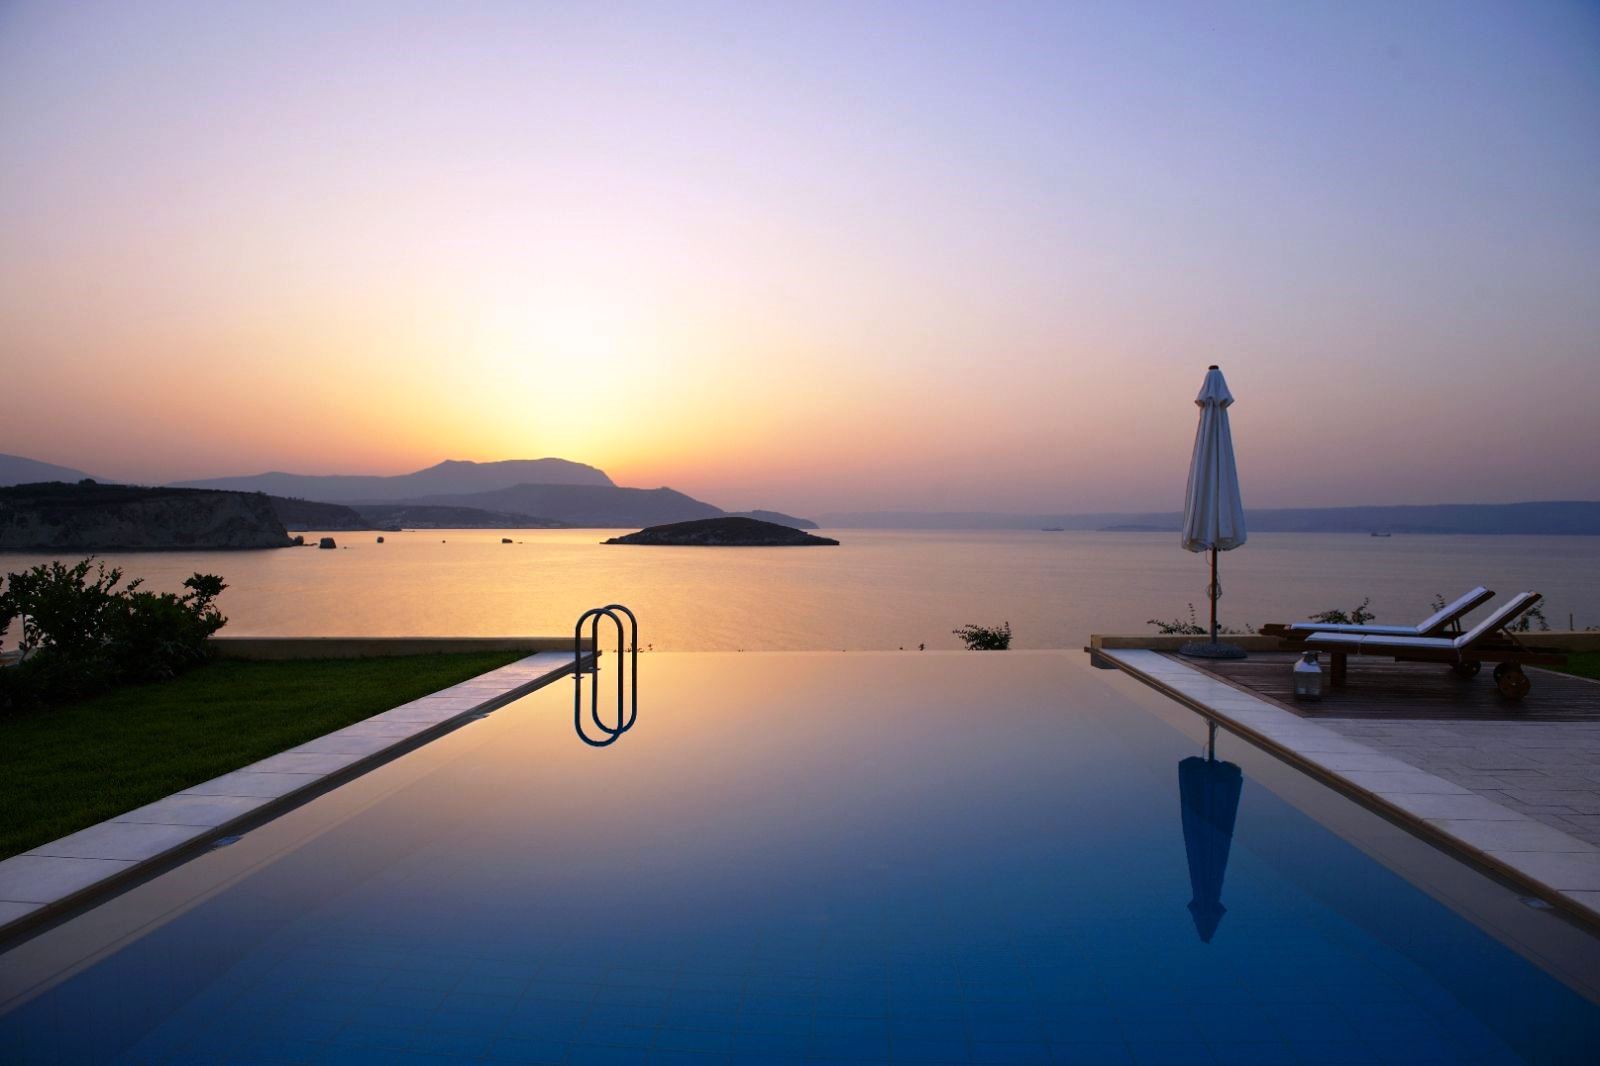 Swimming pool overlooking sea and mountains in the distance at sunset at villa anemos in crete